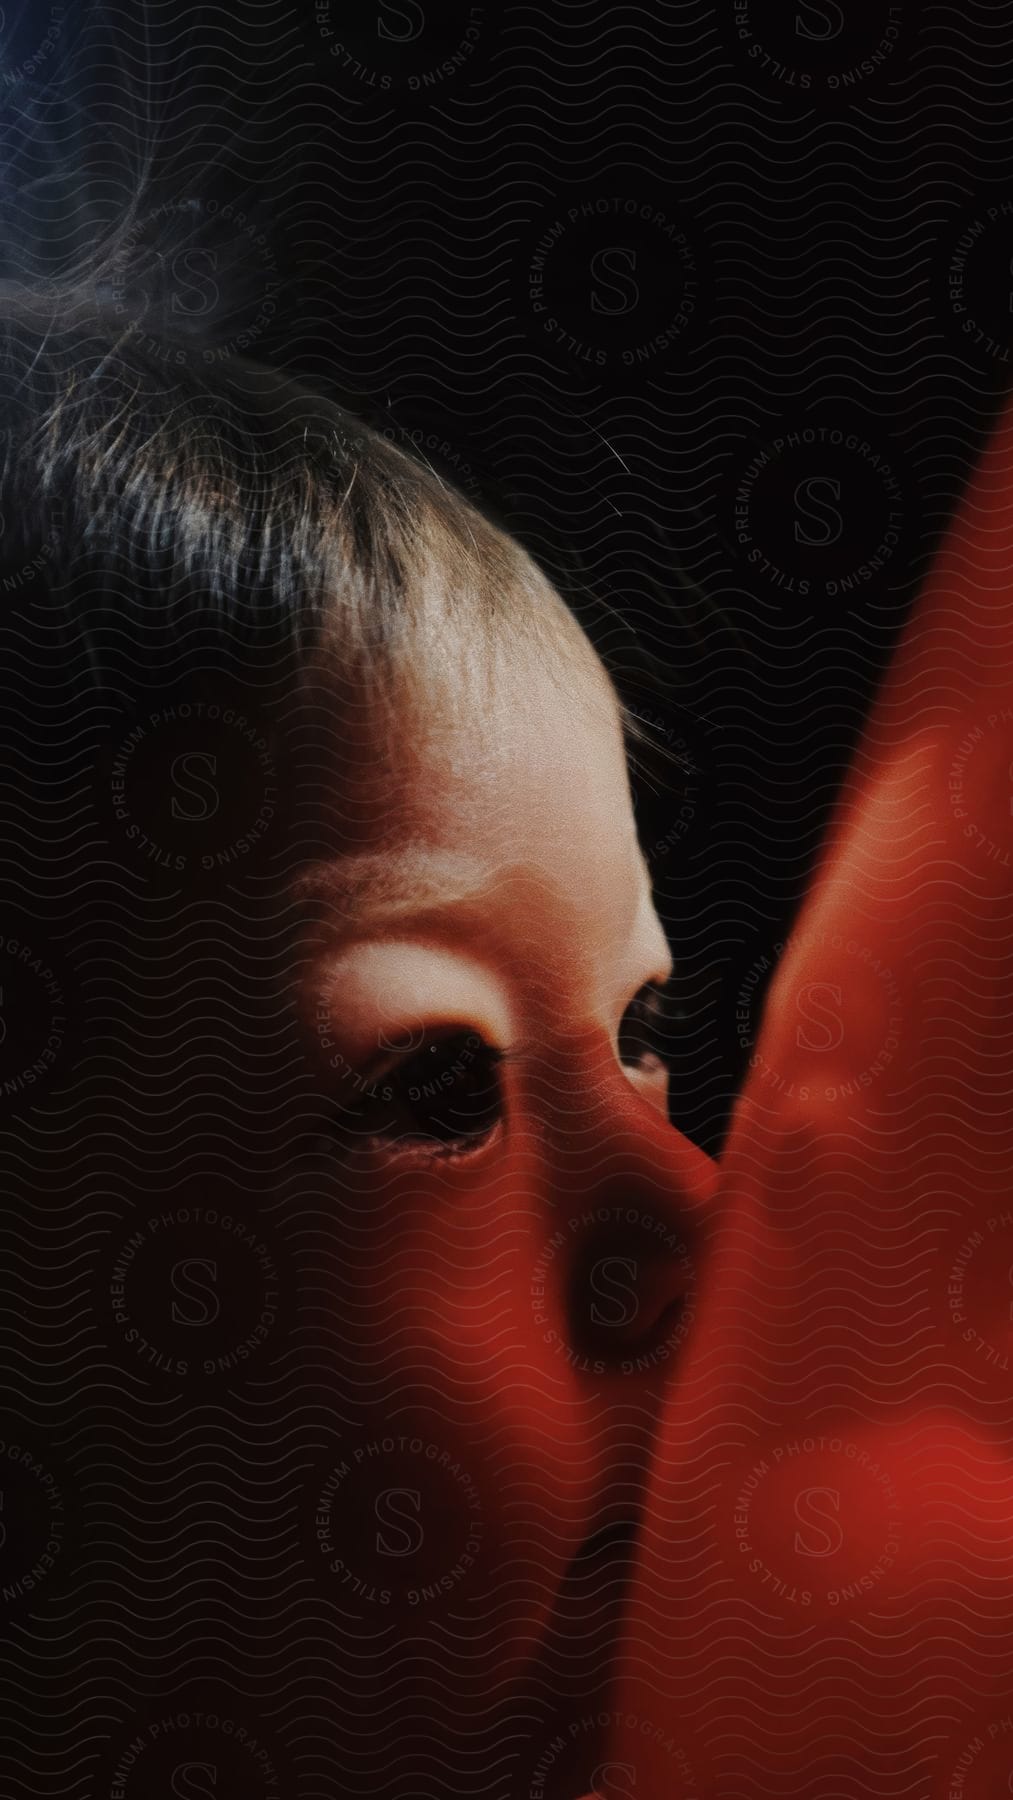 Close-up of a child's side face kissing a red balloon against a black background.